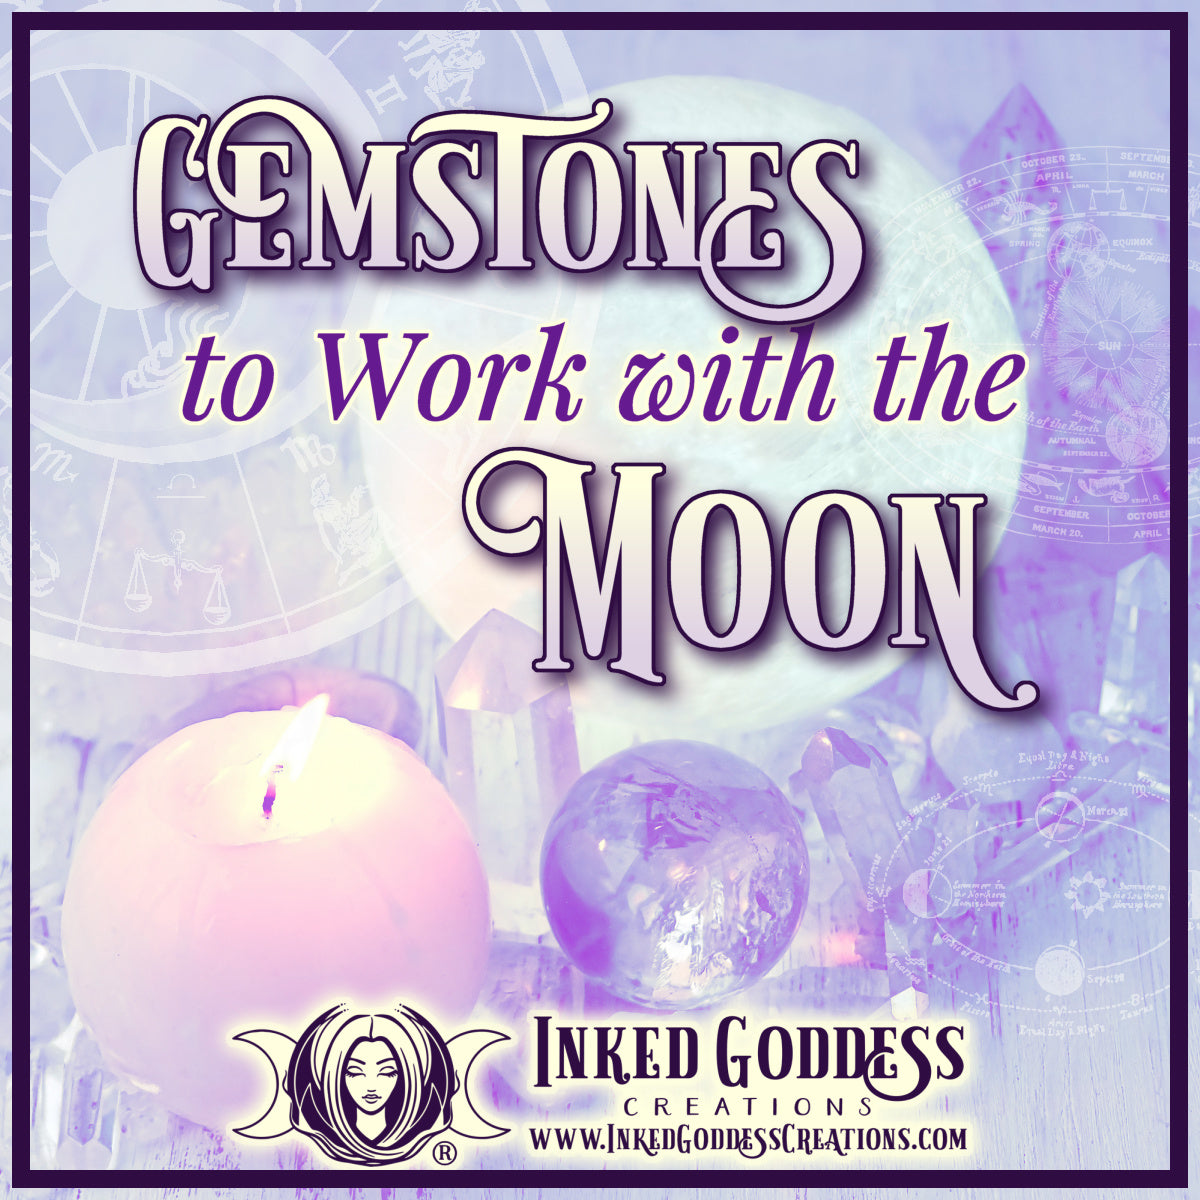 Gemstones to Work with the Moon